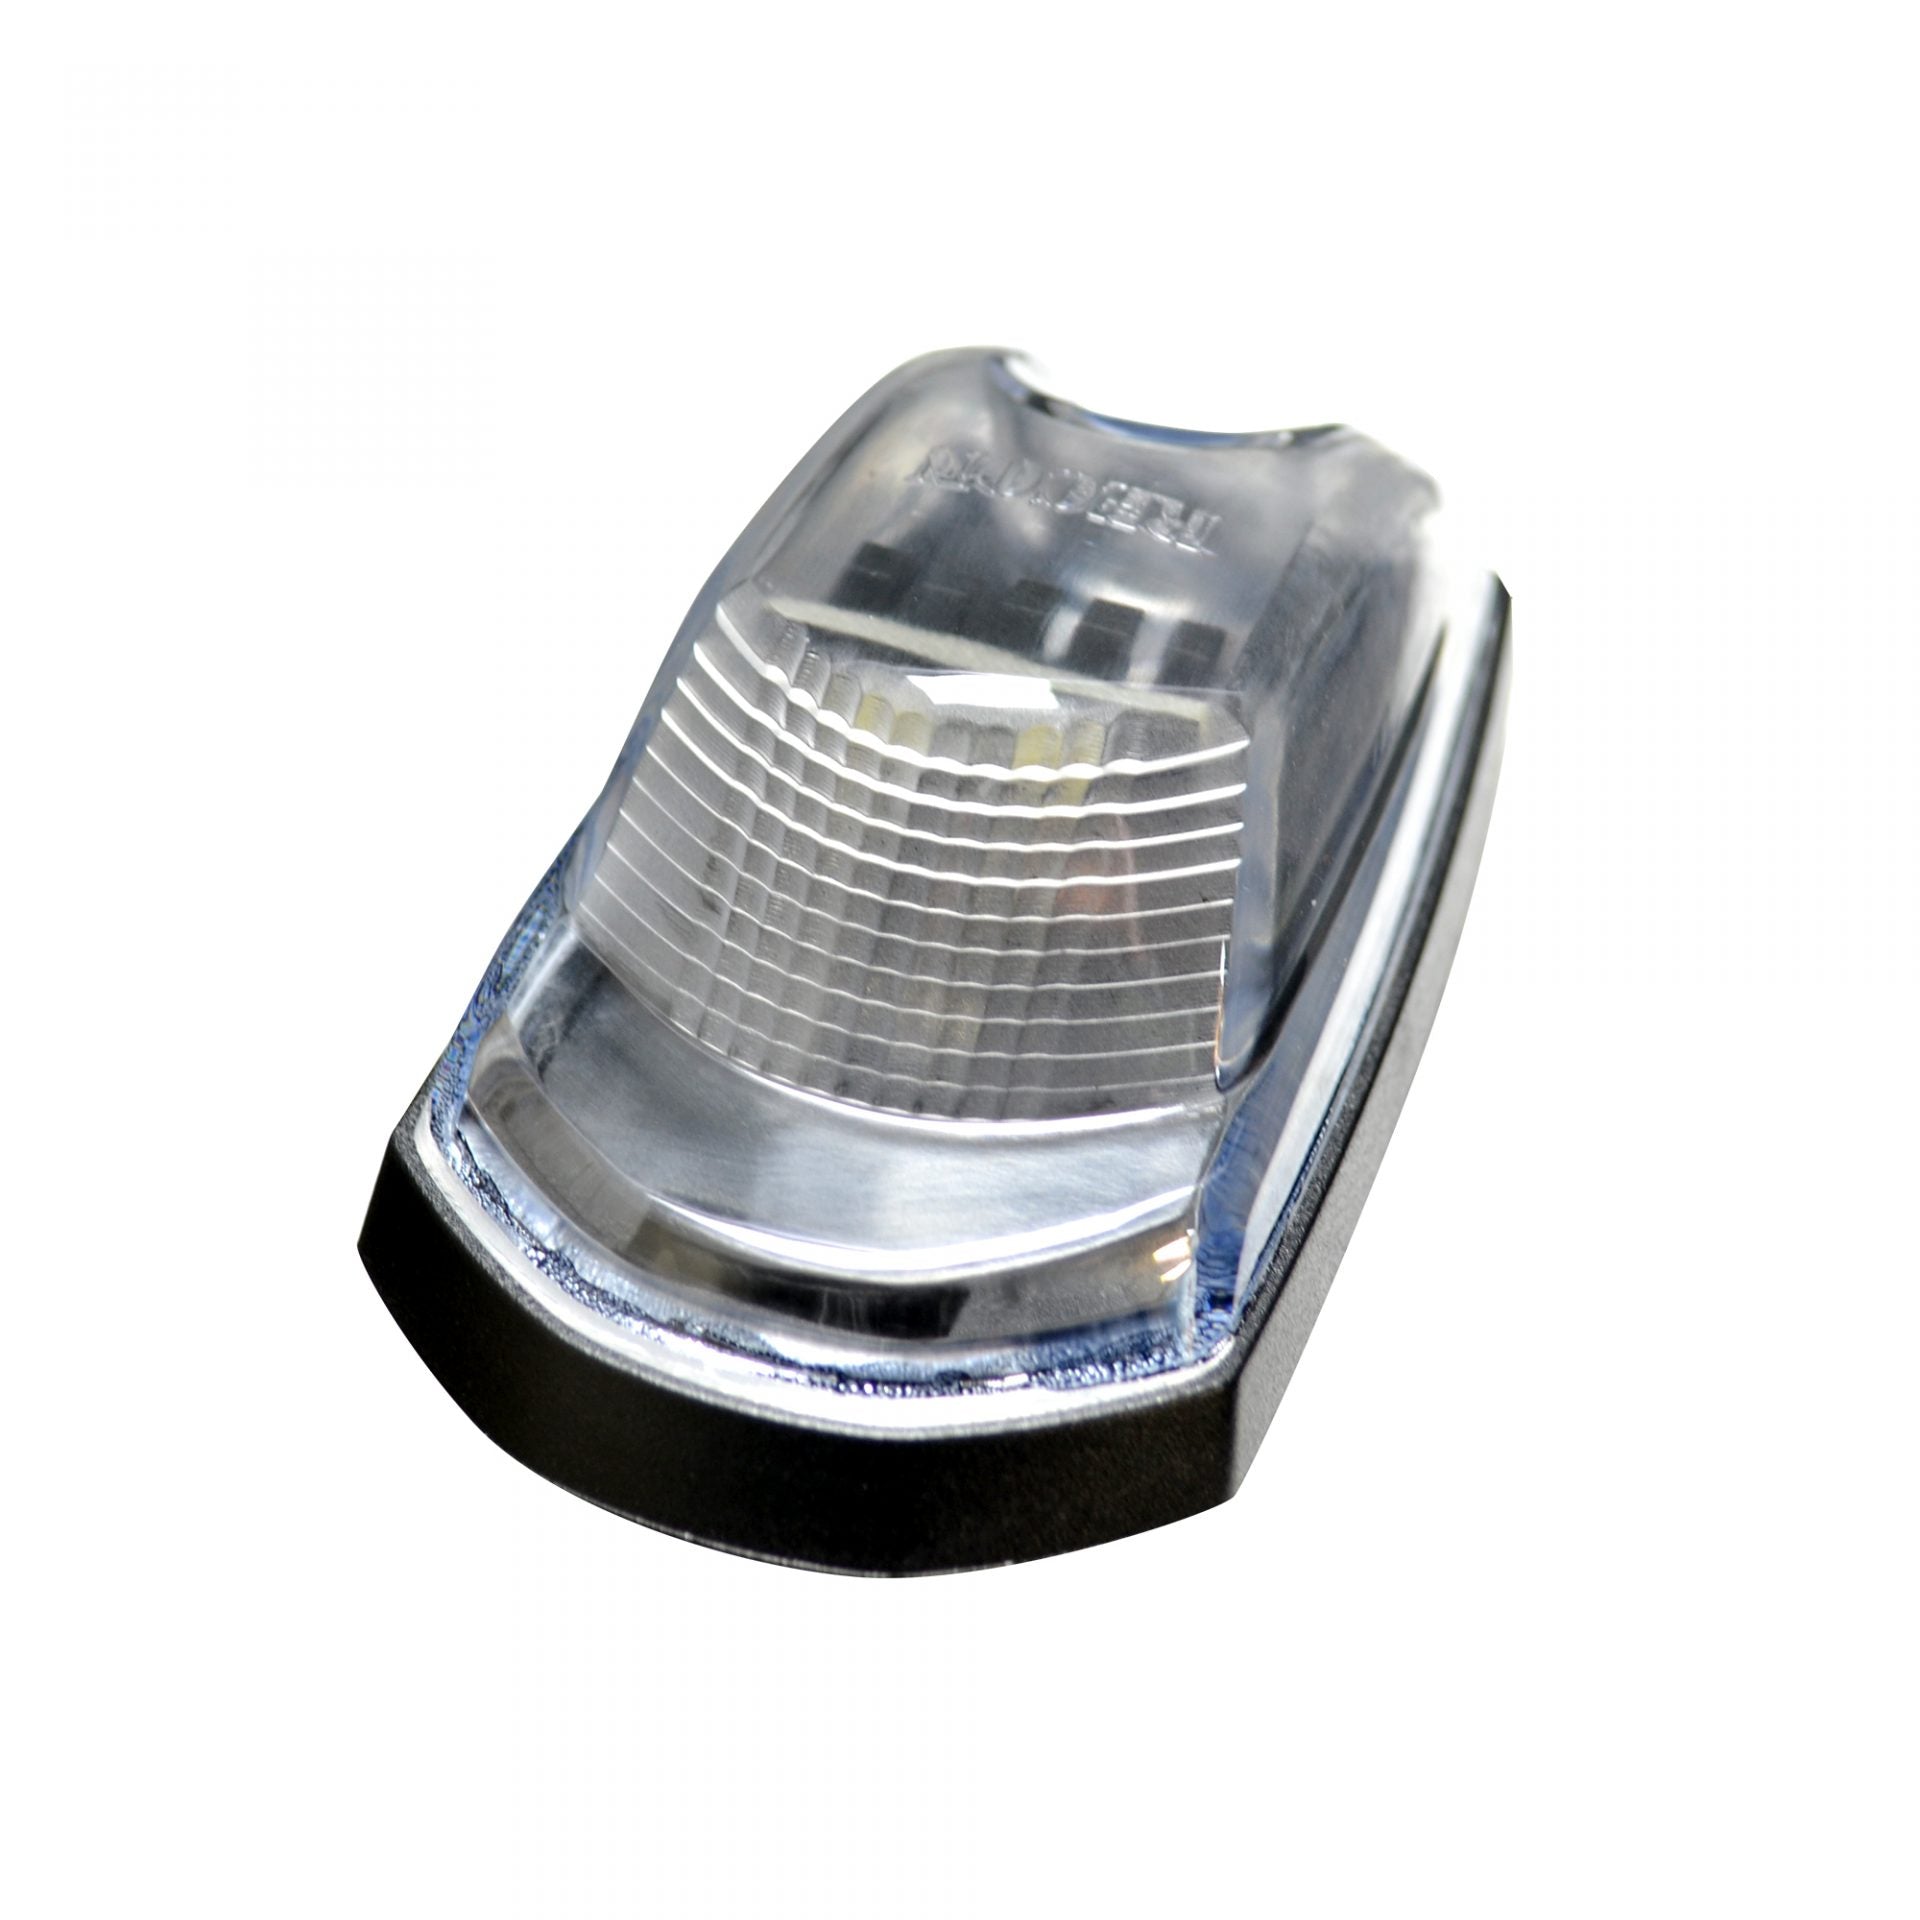 Ford Super Duty 17-19 Single Cab Light 1 Piece Clear Lens in White